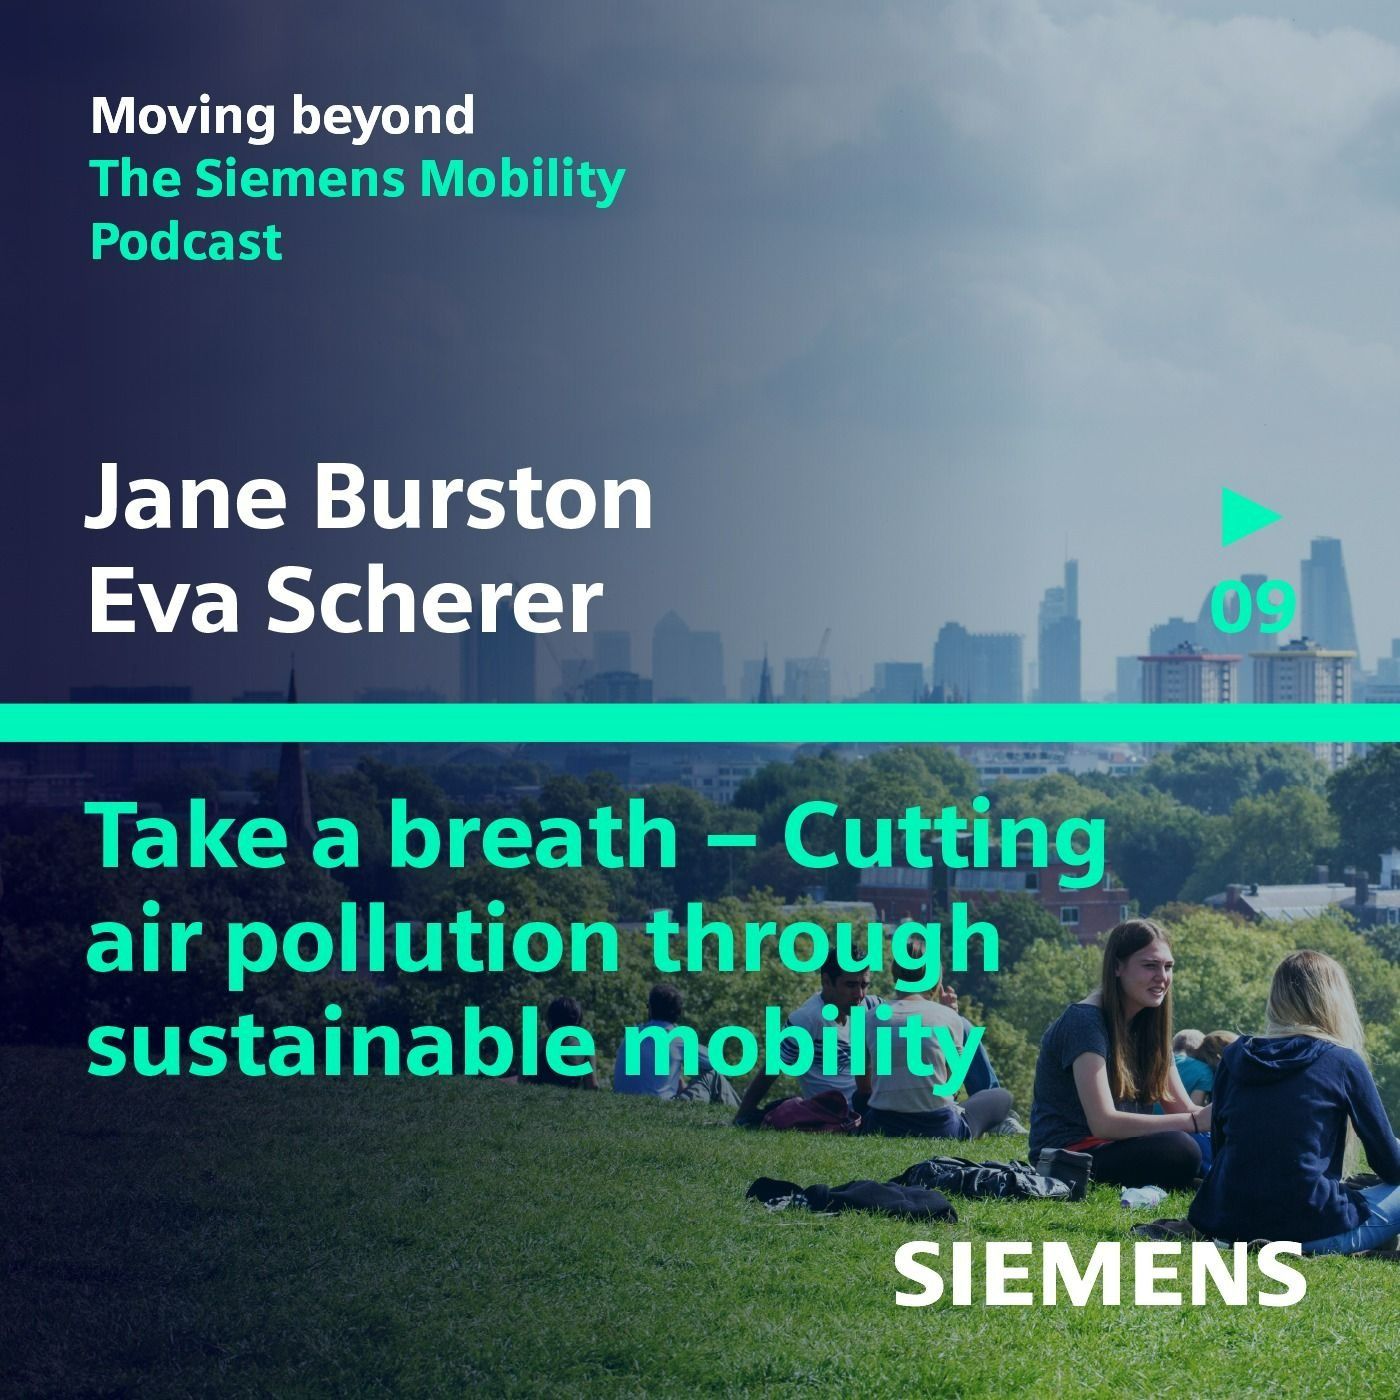 Take a breath – Cutting air pollution through sustainable mobility